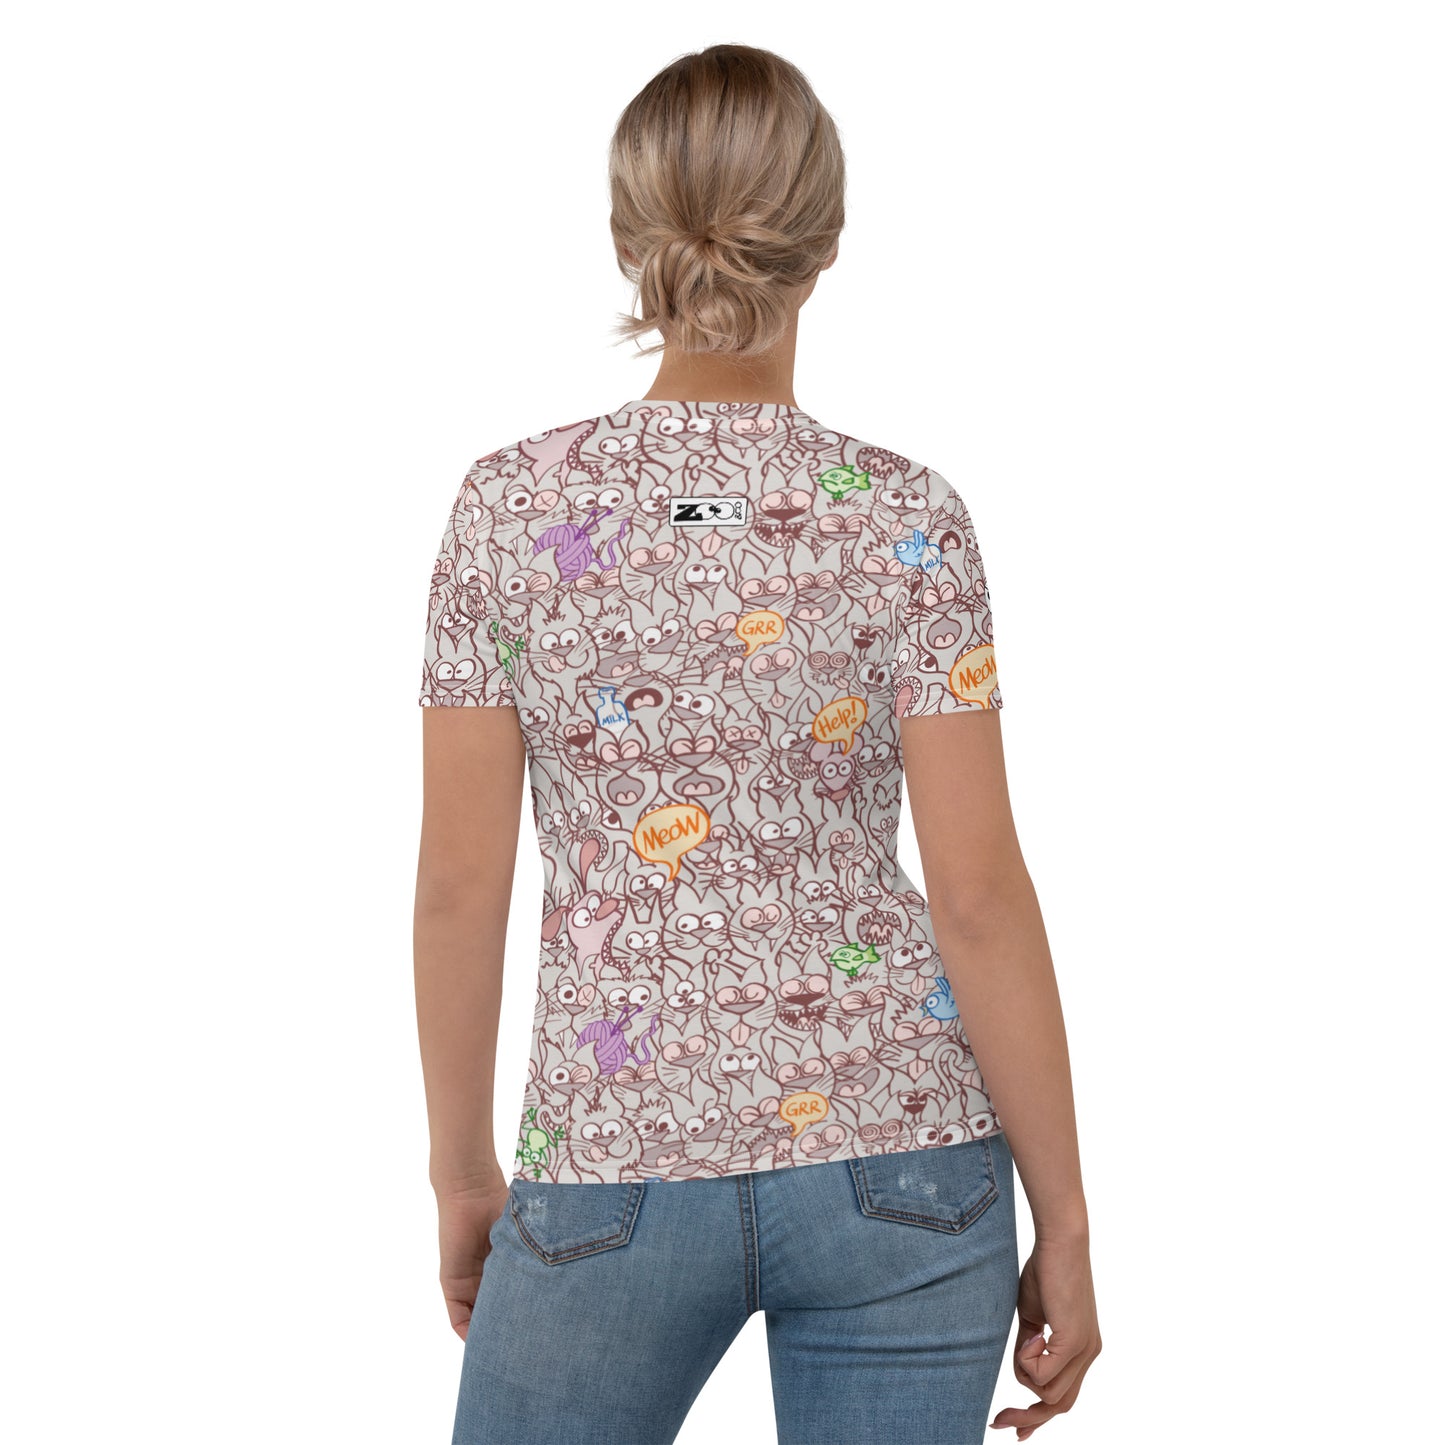 Exclusive design for real cat lovers All-over print Women's T-shirt. Back view